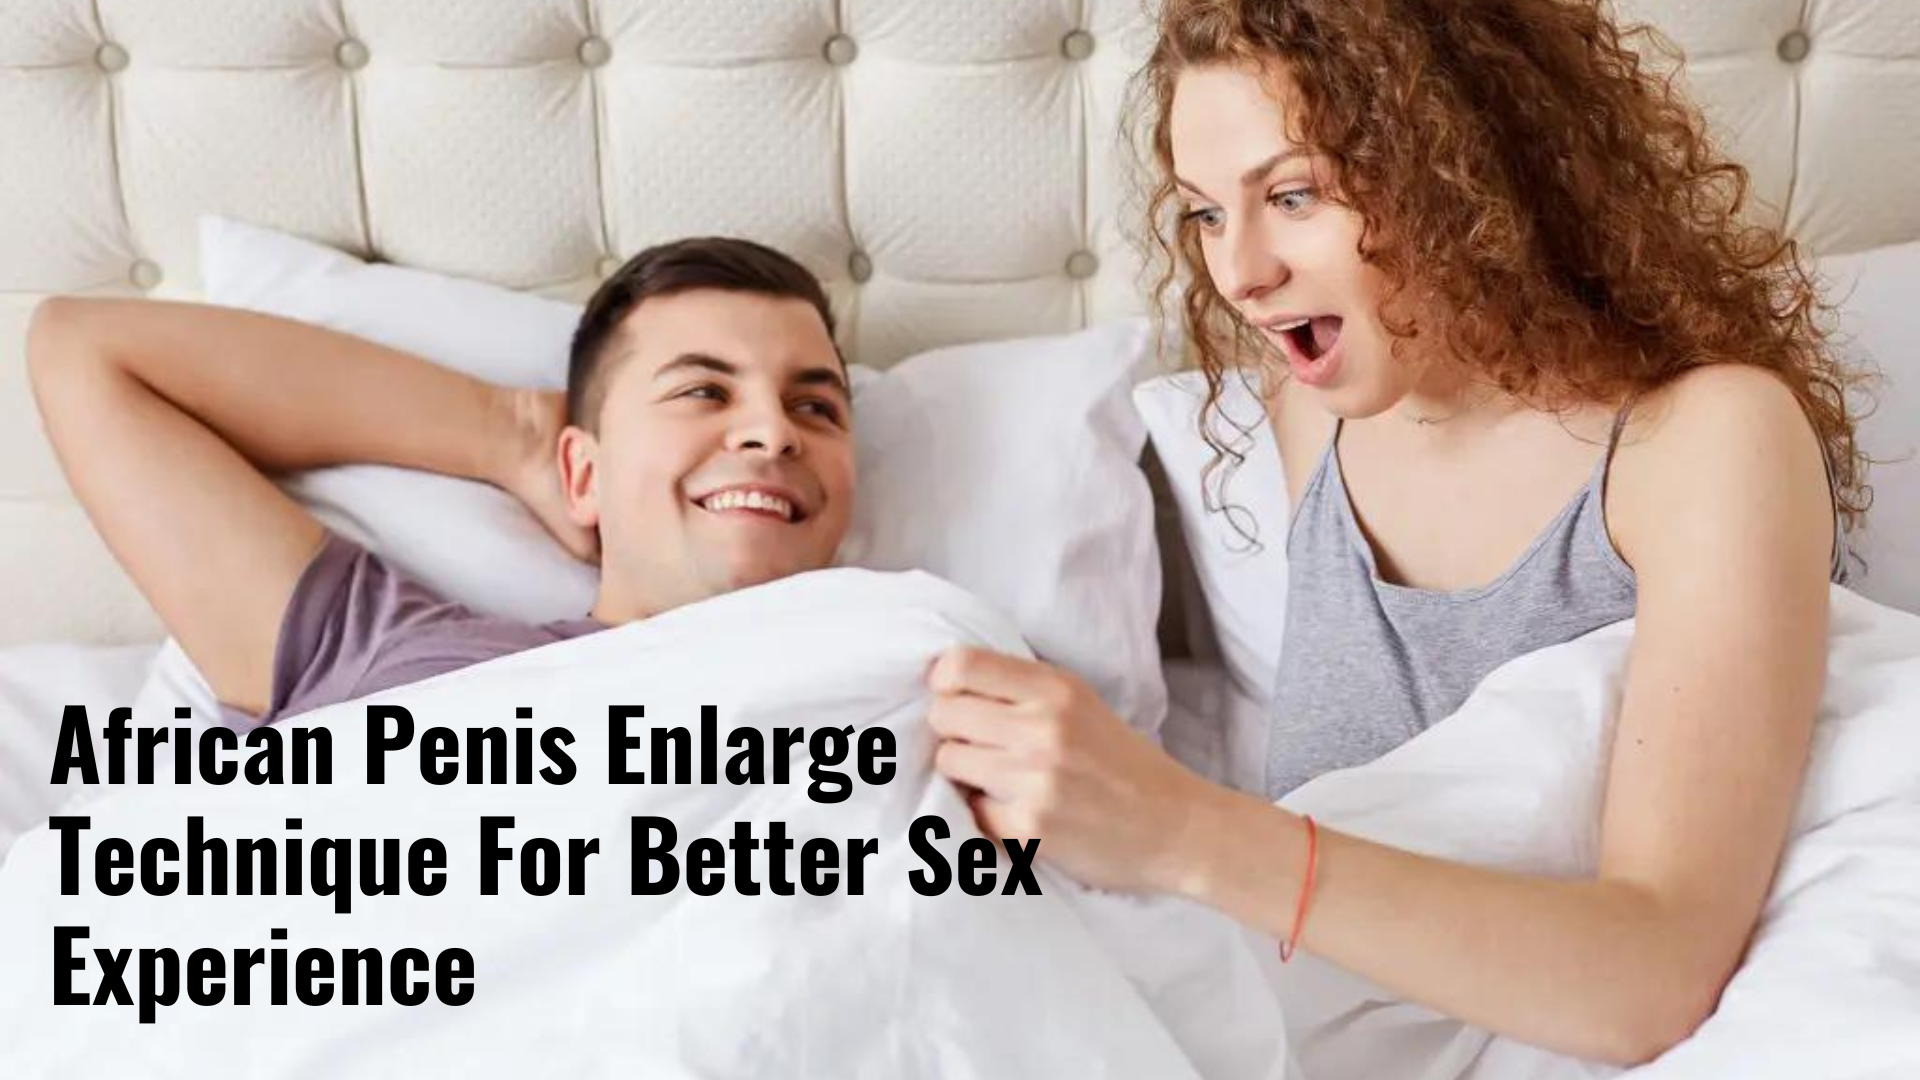 African Penis Enlarge Technique For Better Sex Experience